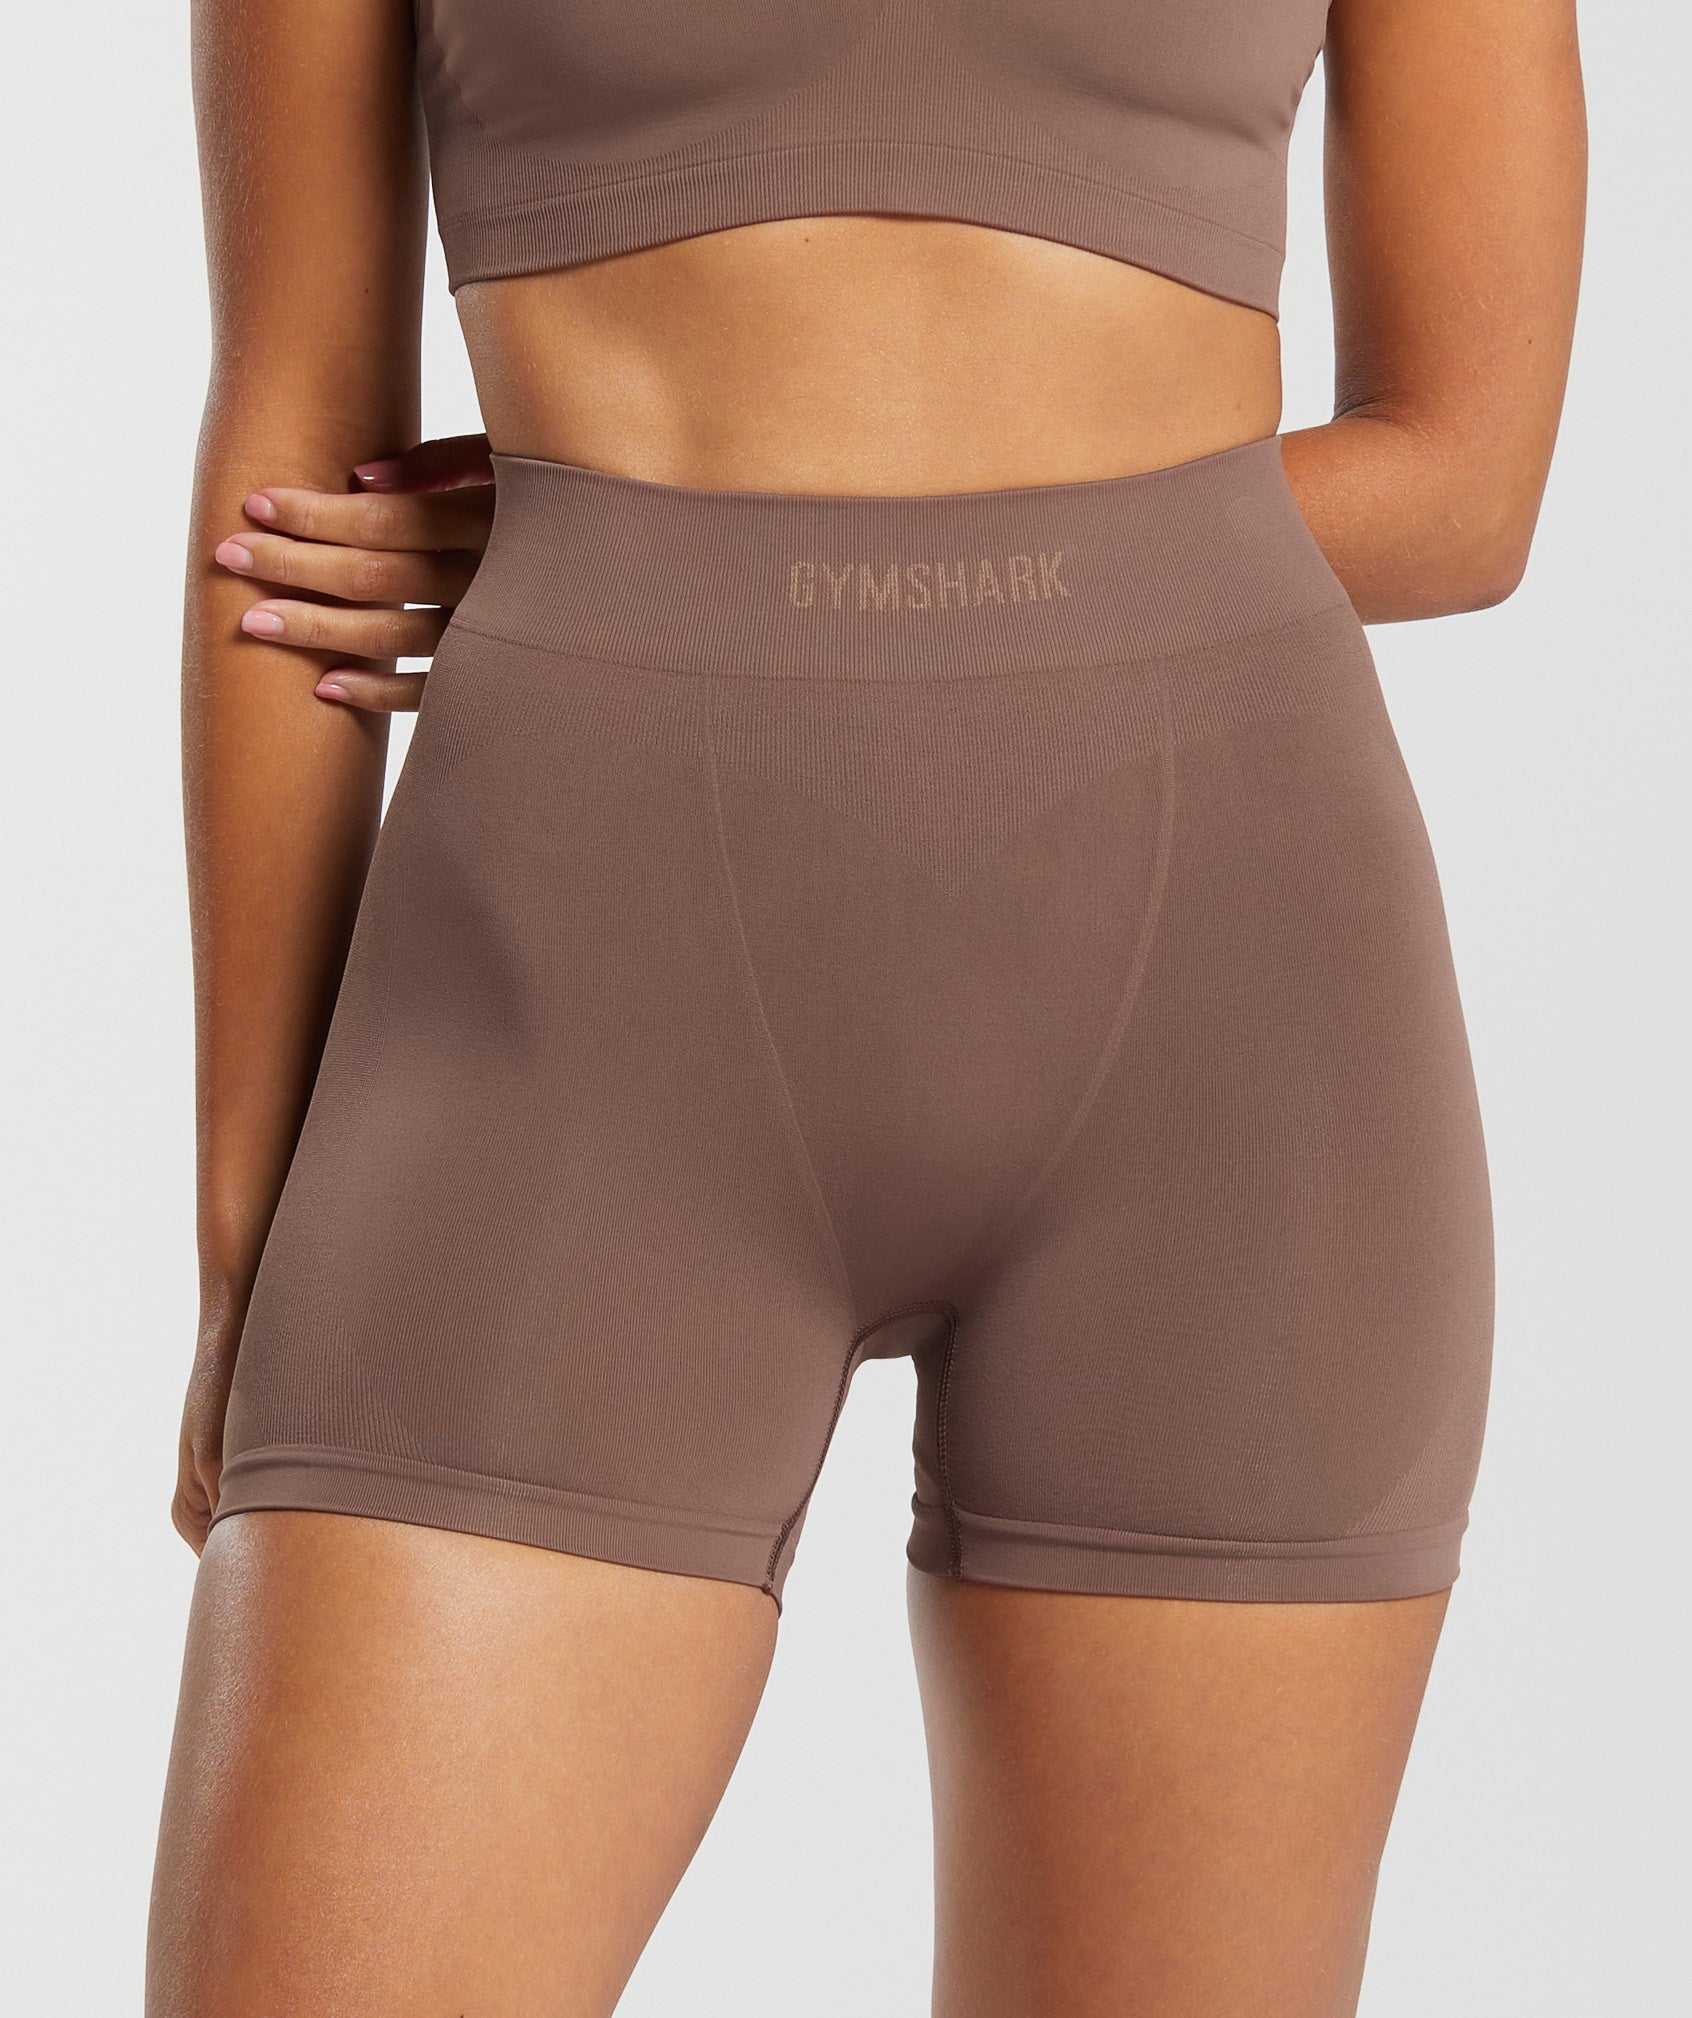 GymShark….. be so for real. The poor models underwear is showing?! :  r/gymsnark